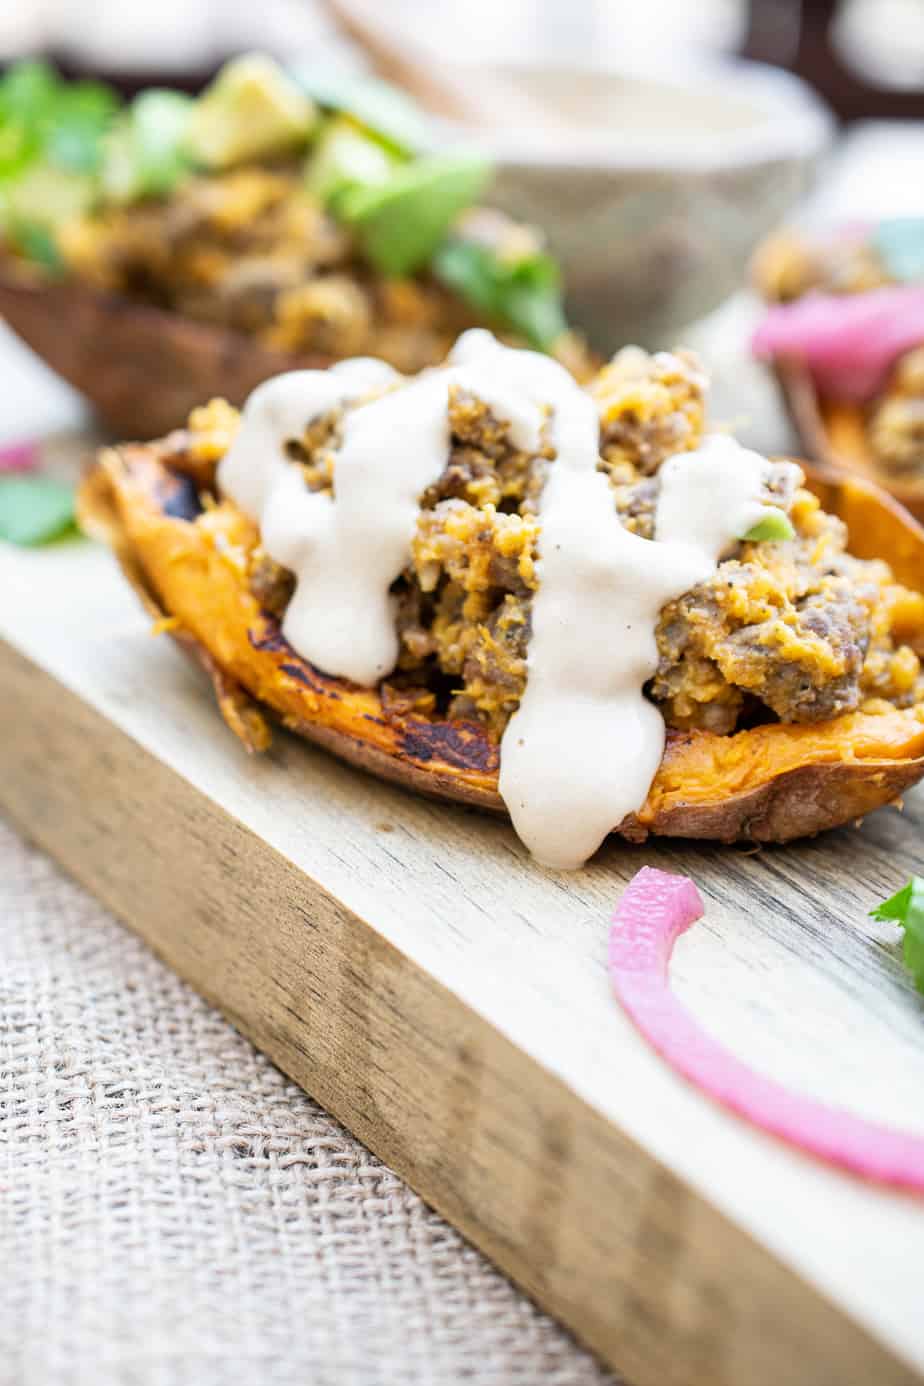 one stuffed sweet potato skin at the forefront with a generous dose of sauce drizzled on top. 